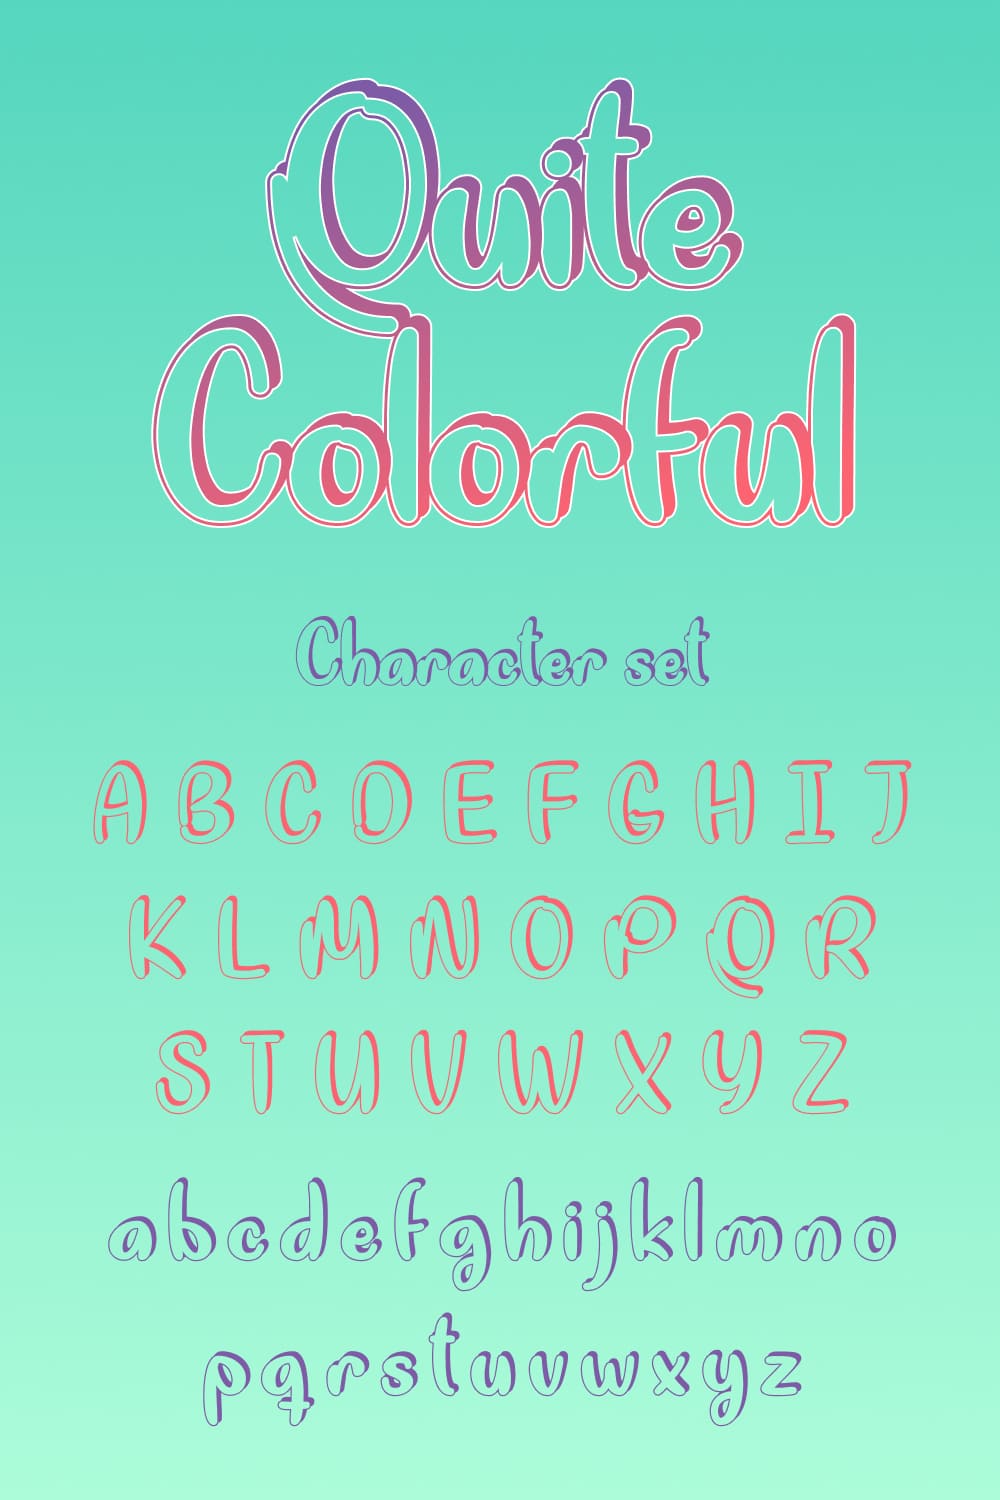 MasterBundles Free colorful font Pinterest Collage Image with Character set.